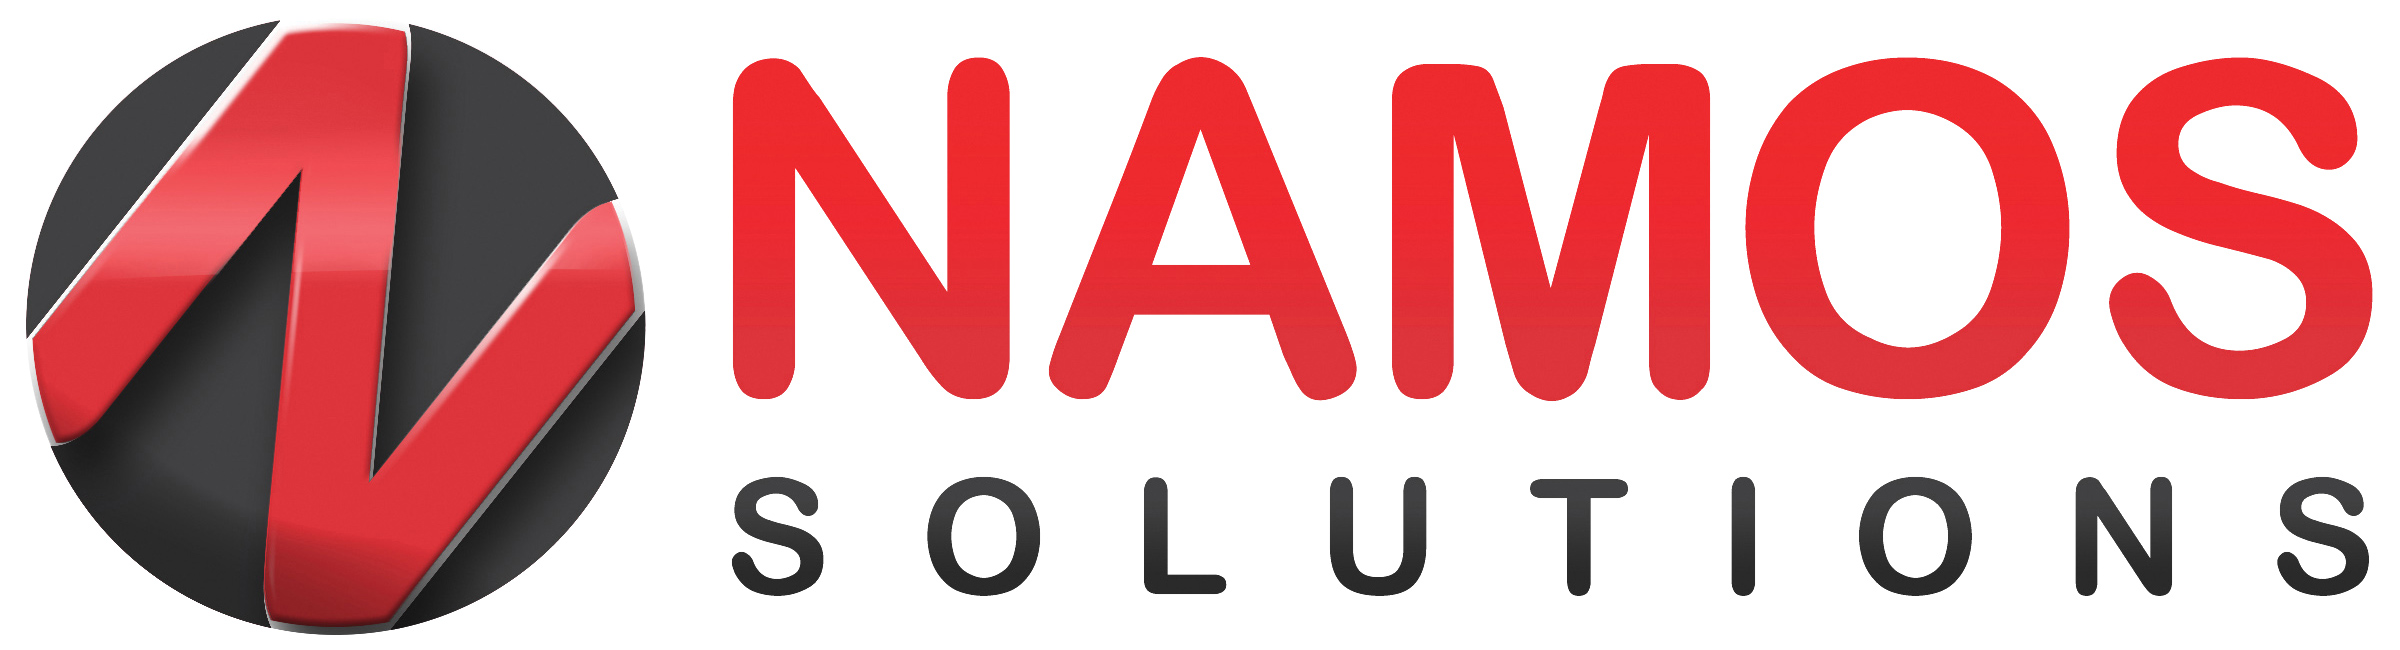 Namos Solutions are Now Recruiting - Launch Your Career in Oracle Consulting 